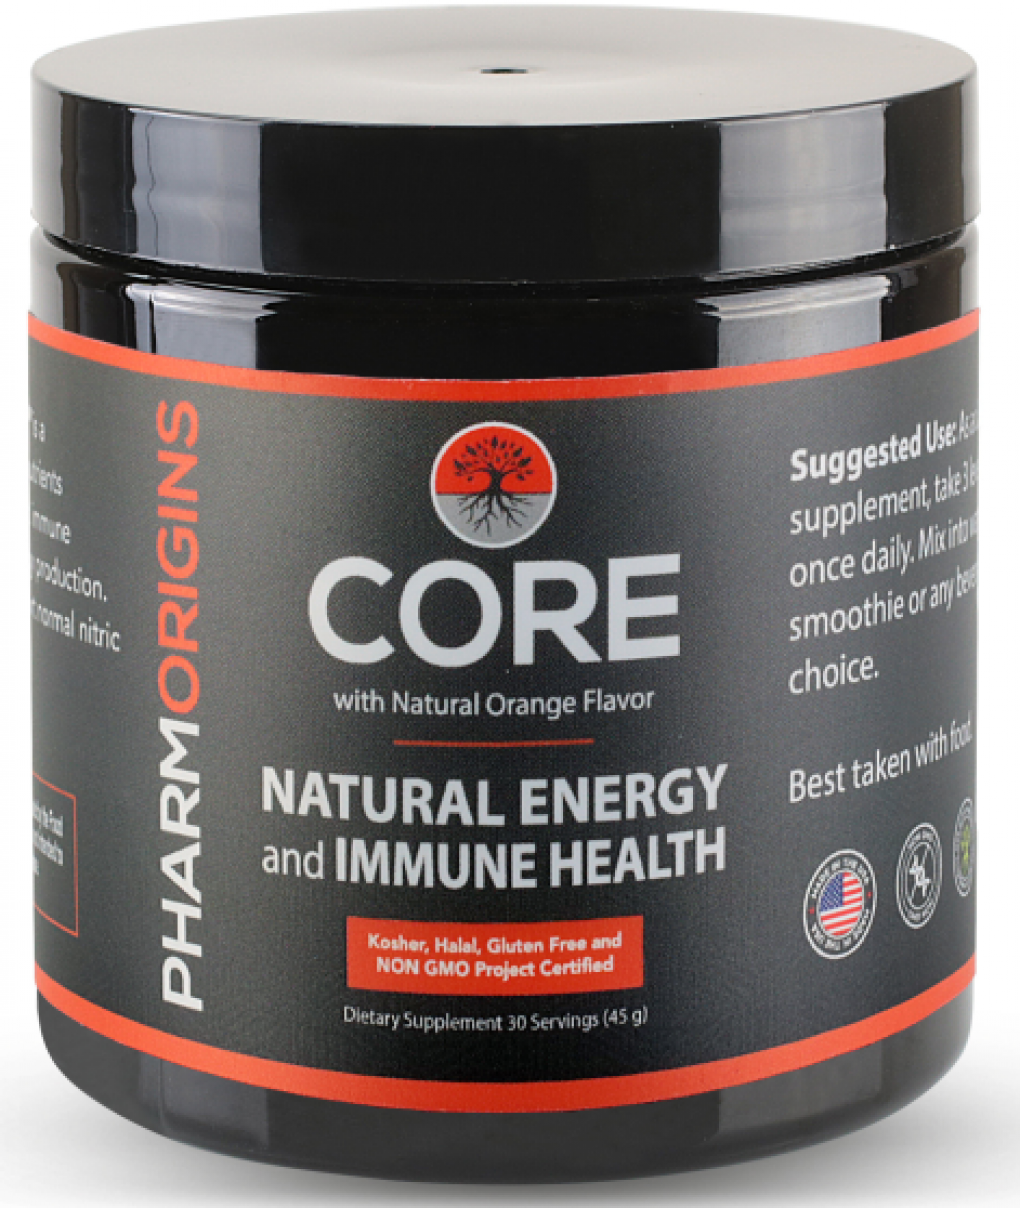 Fusion Health and Vitality recalled Core Essential Nutrients and Immune Boost Sublingual Vitamin D3